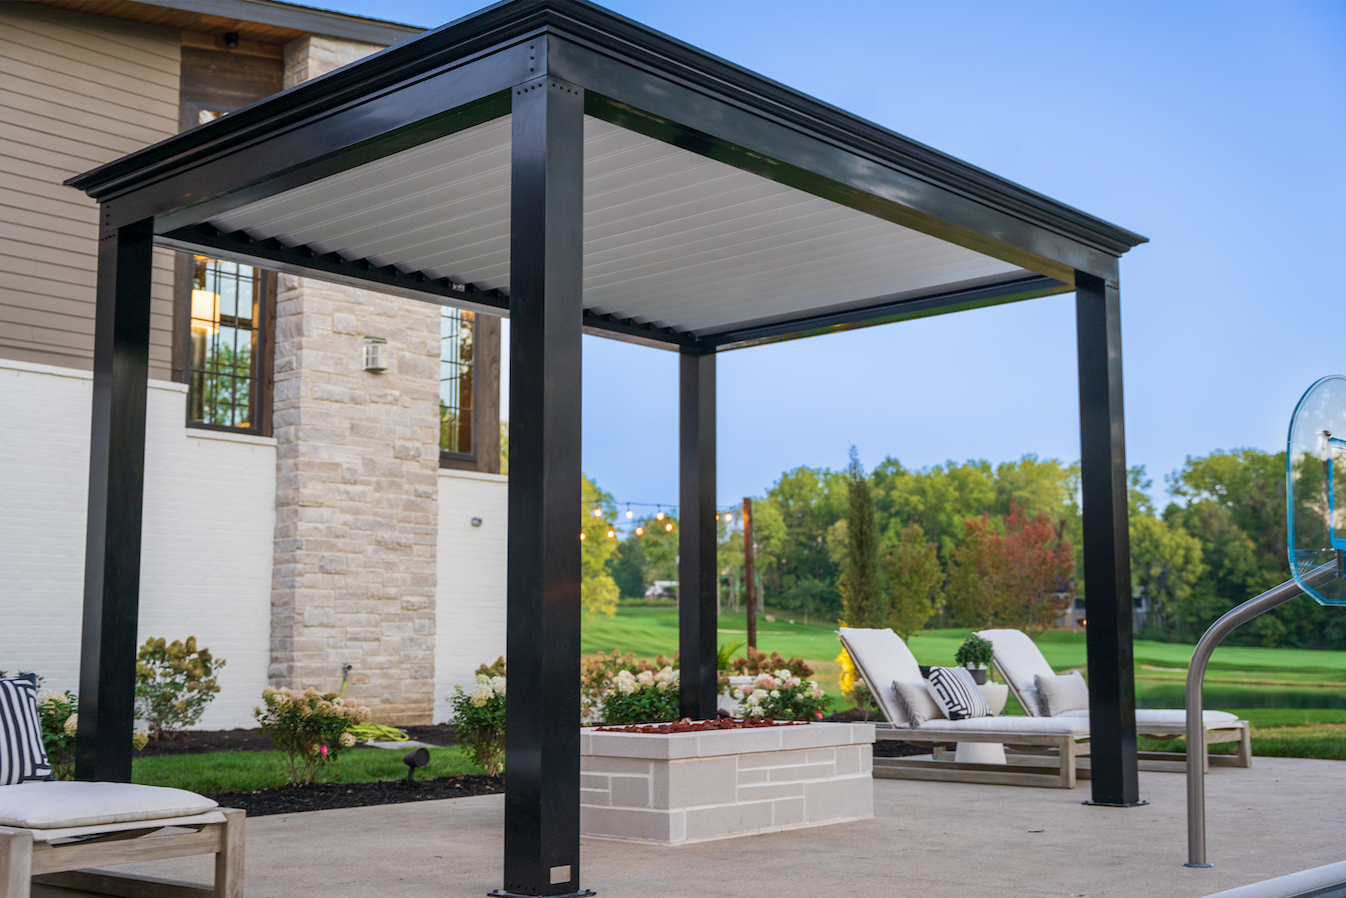 Custom Modern pergolas with sleek clean lines giving your backyard style while providing shade